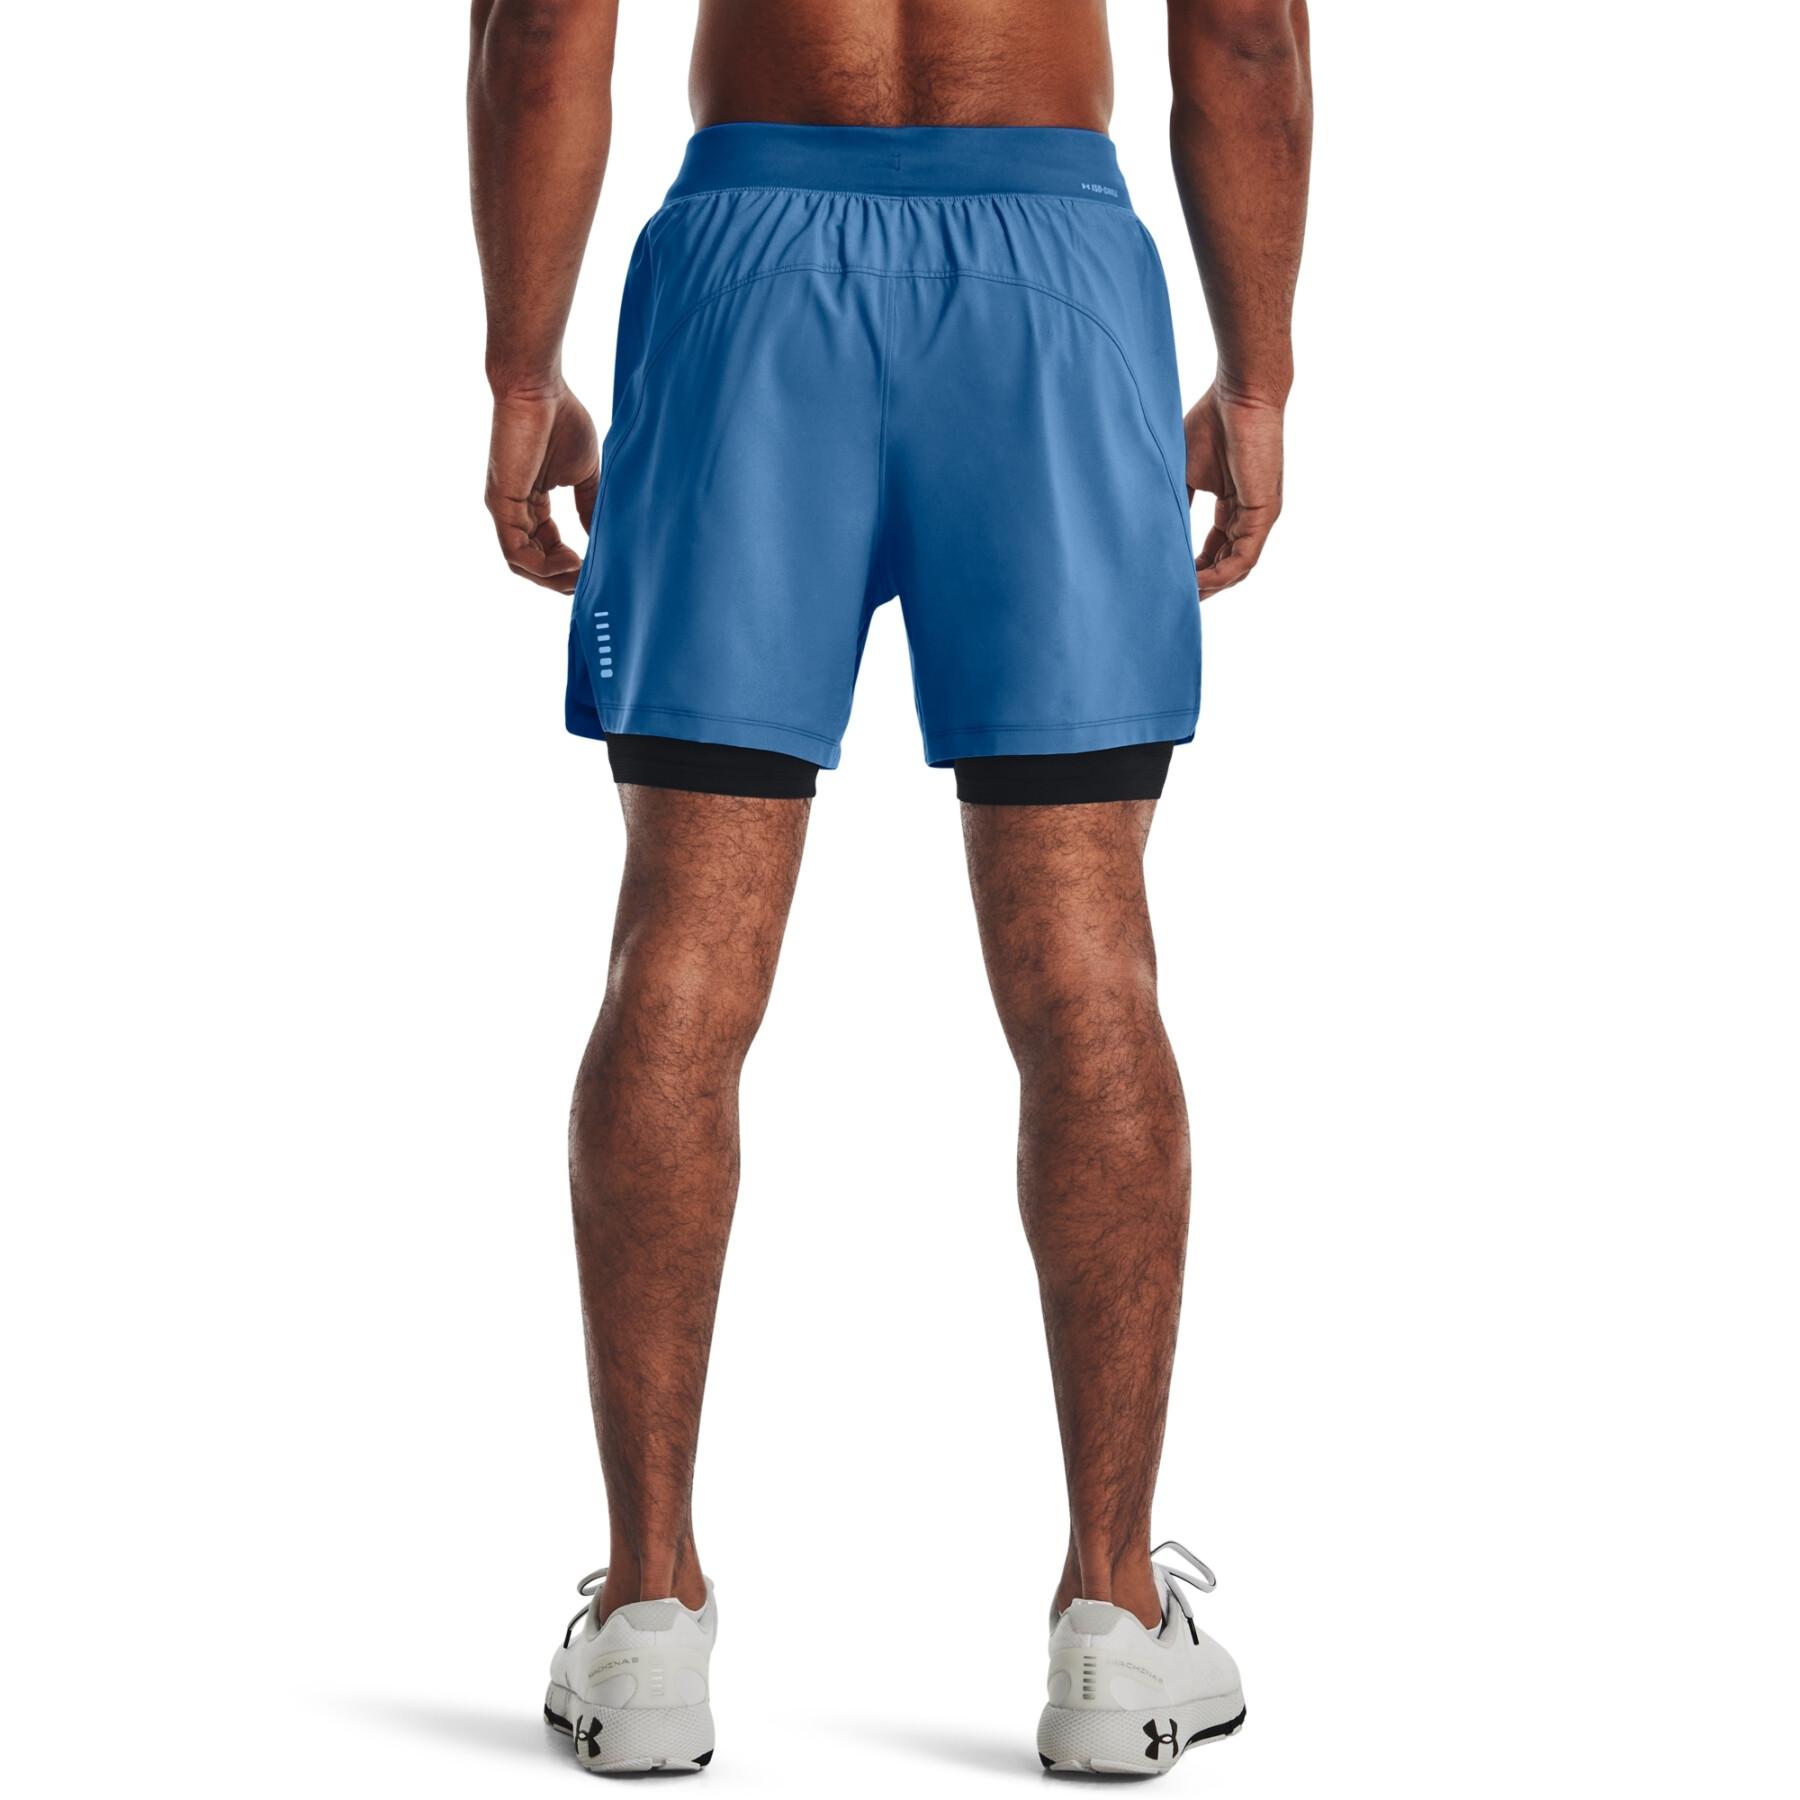 2-in-1 shorts Under Armour Iso-chill run